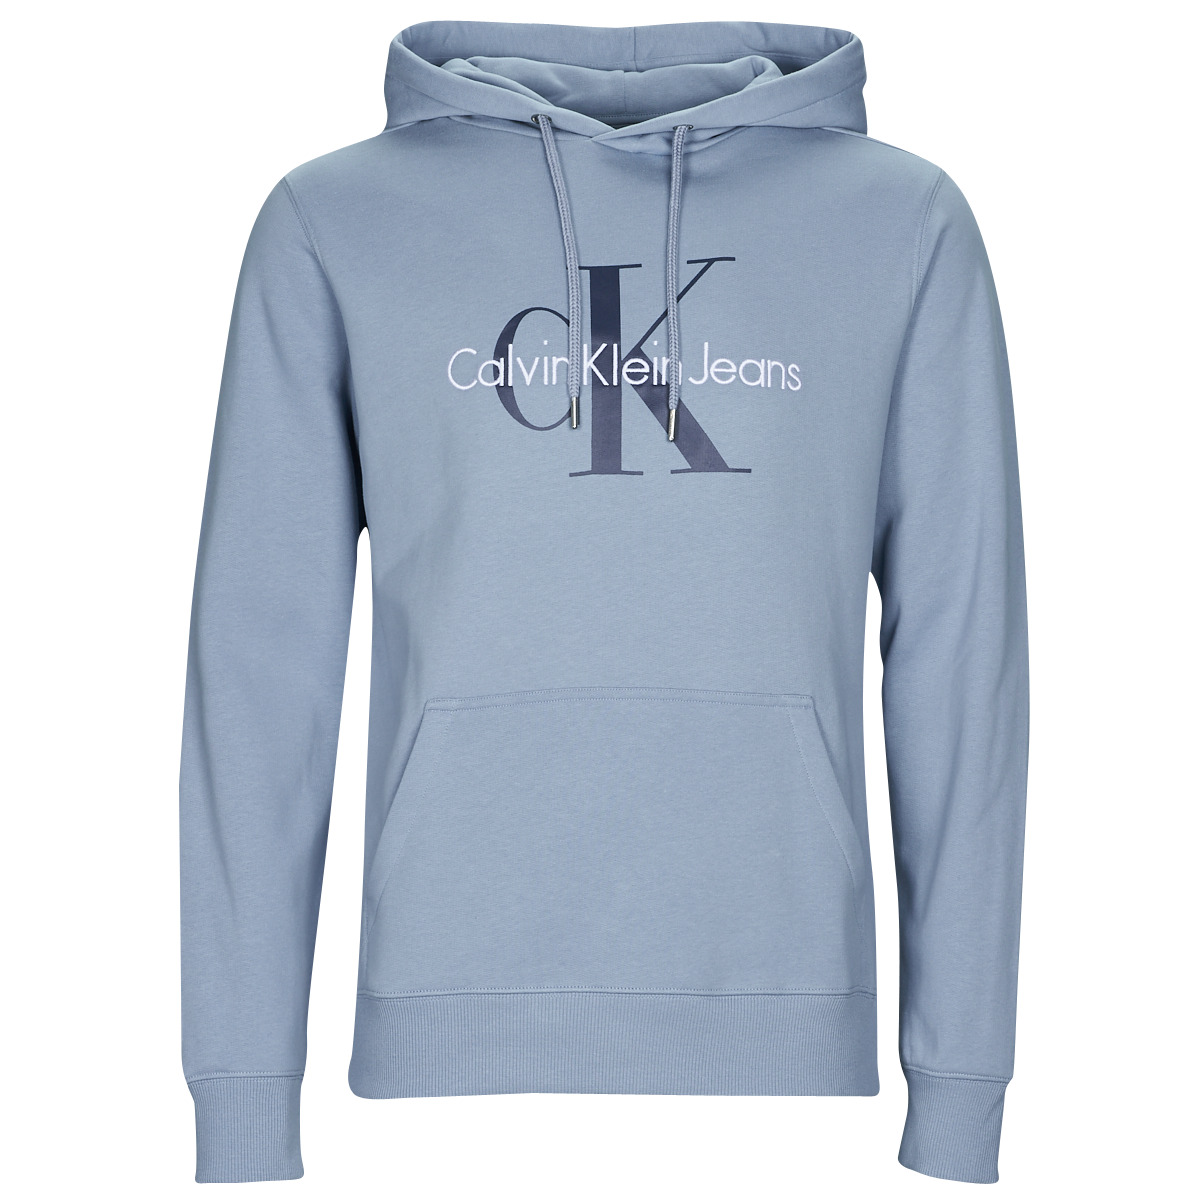 Calvin Klein Jeans MONOLOGO REGULAR Men ! Free sweaters NET - - HOODIE Clothing Blue delivery Spartoo 